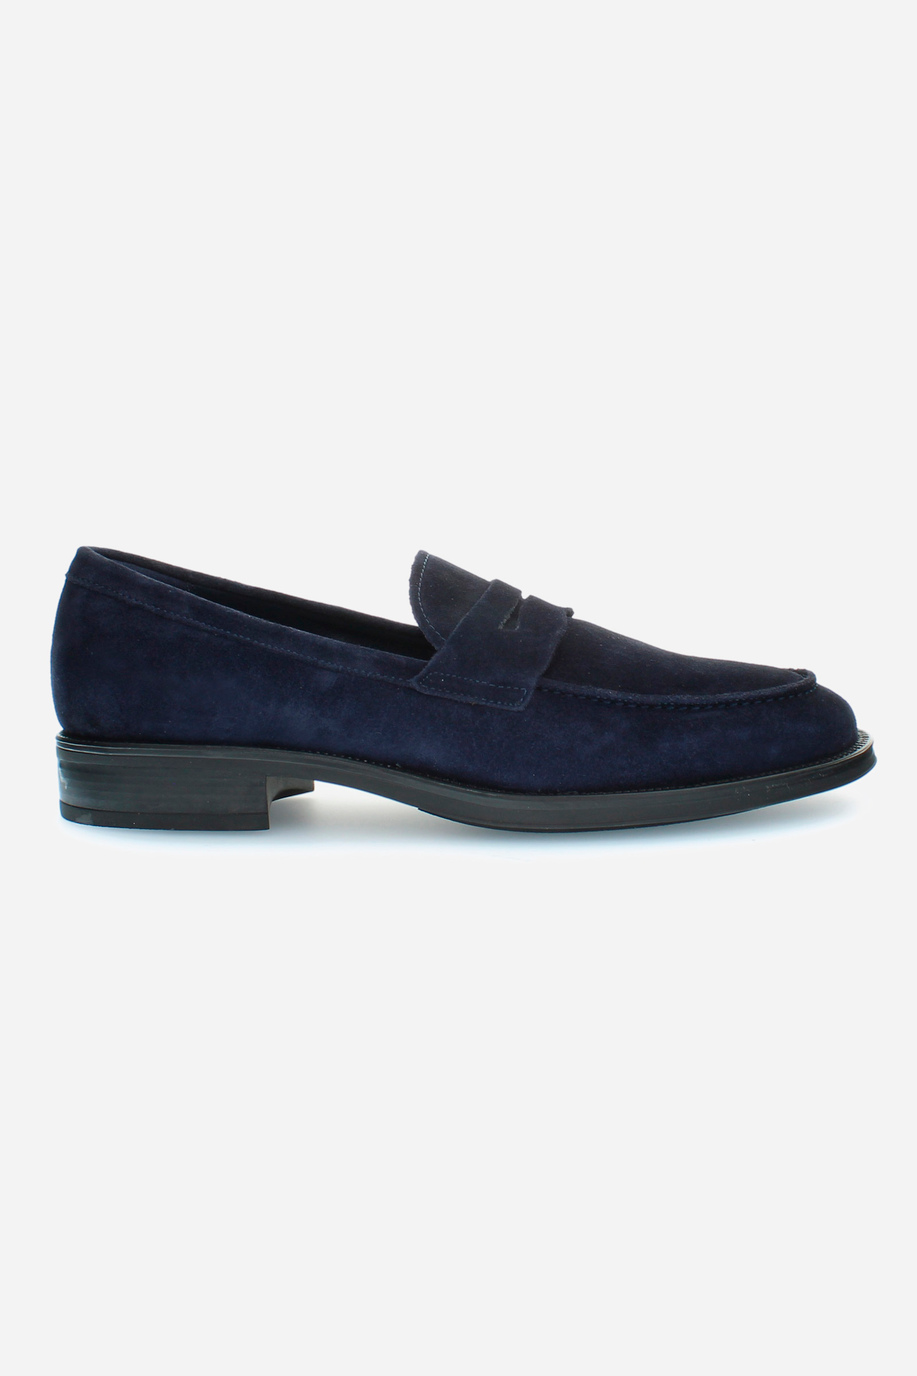 Men's college loafers in leather - Formal Shoes | La Martina - Official Online Shop